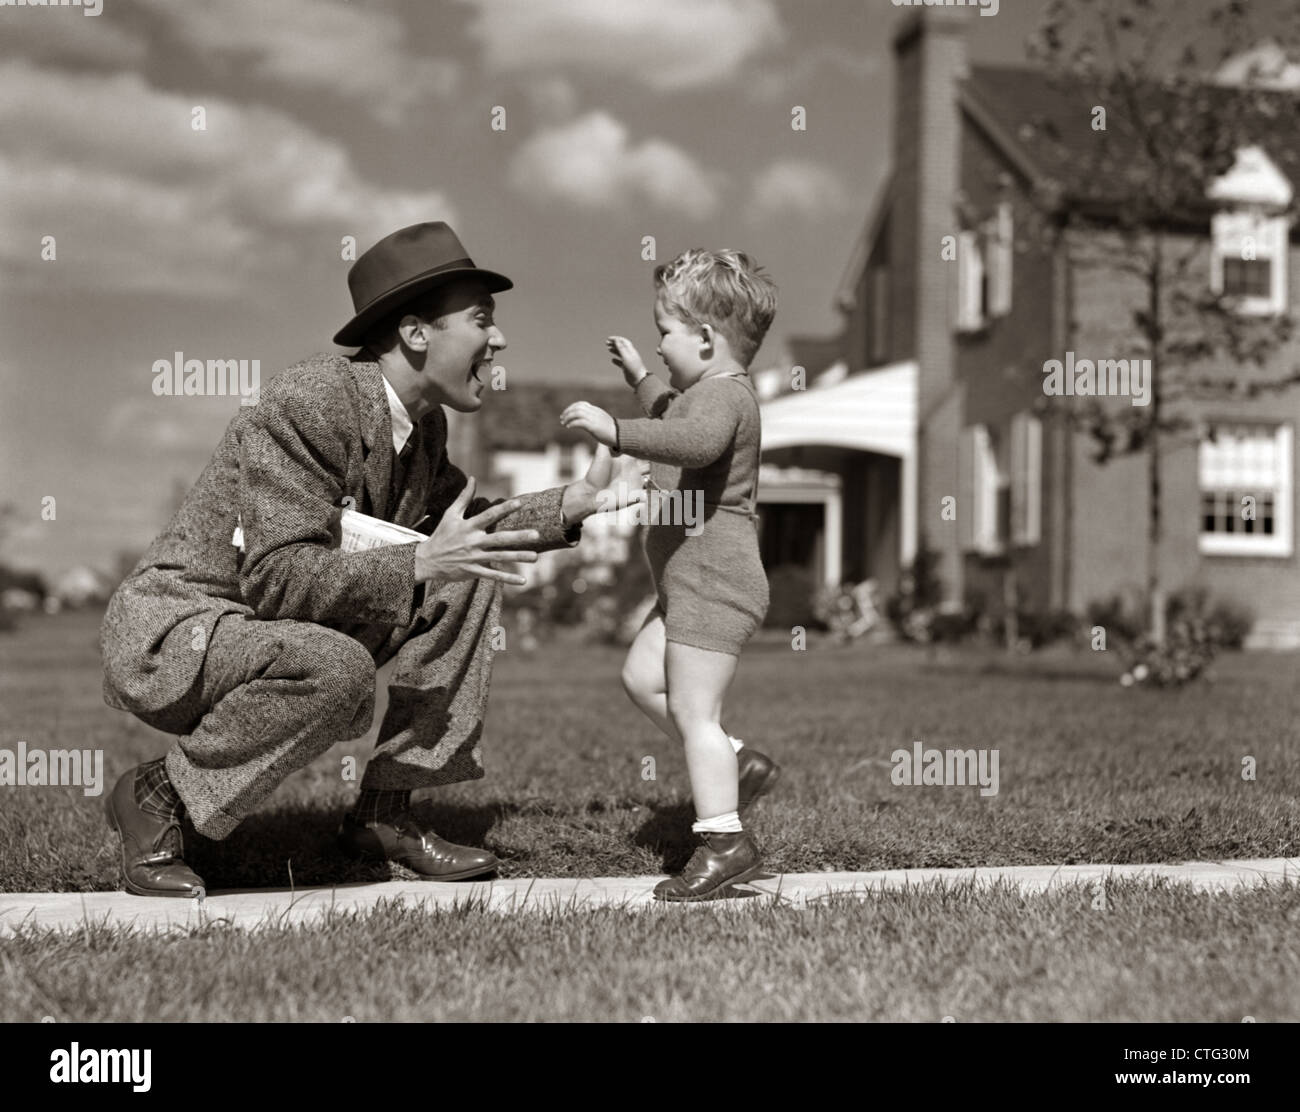 1940s FATHER GREETING SON RUNNING TOWARDS HIM ON SIDEWALK Stock Photo